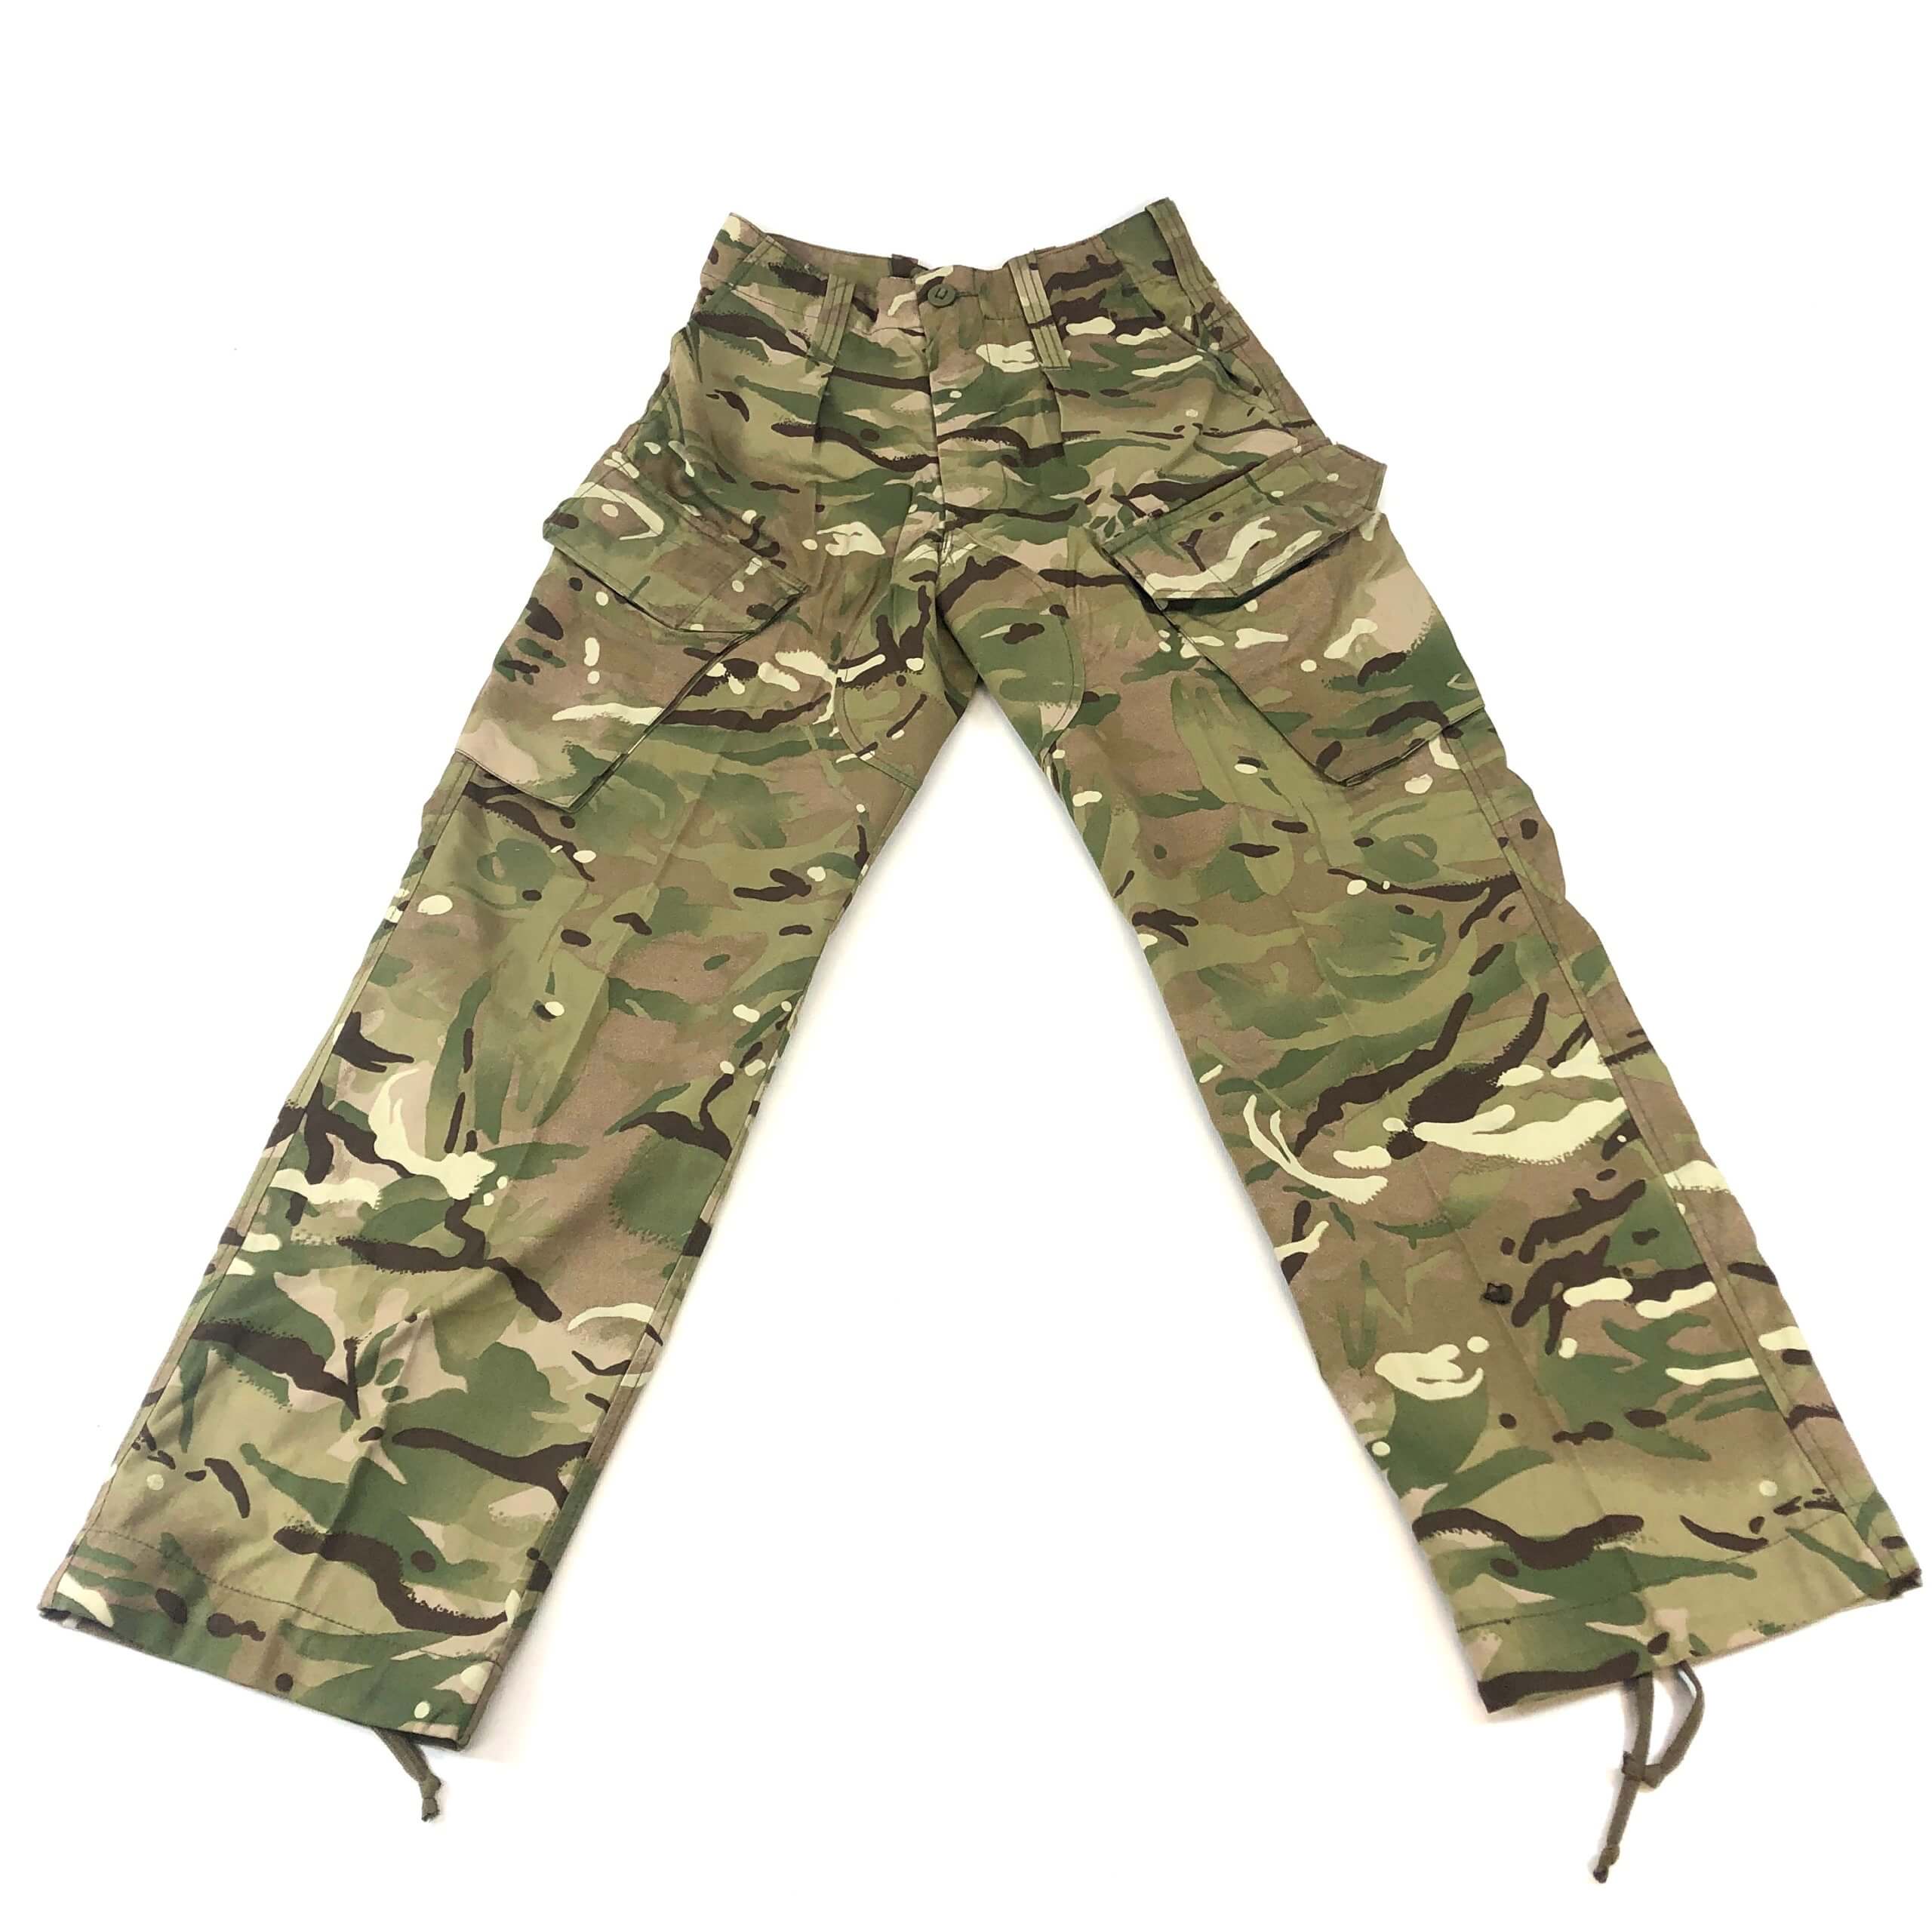 British DPM Camouflage BDU Trousers All Sizes Military Army Pants Camo New